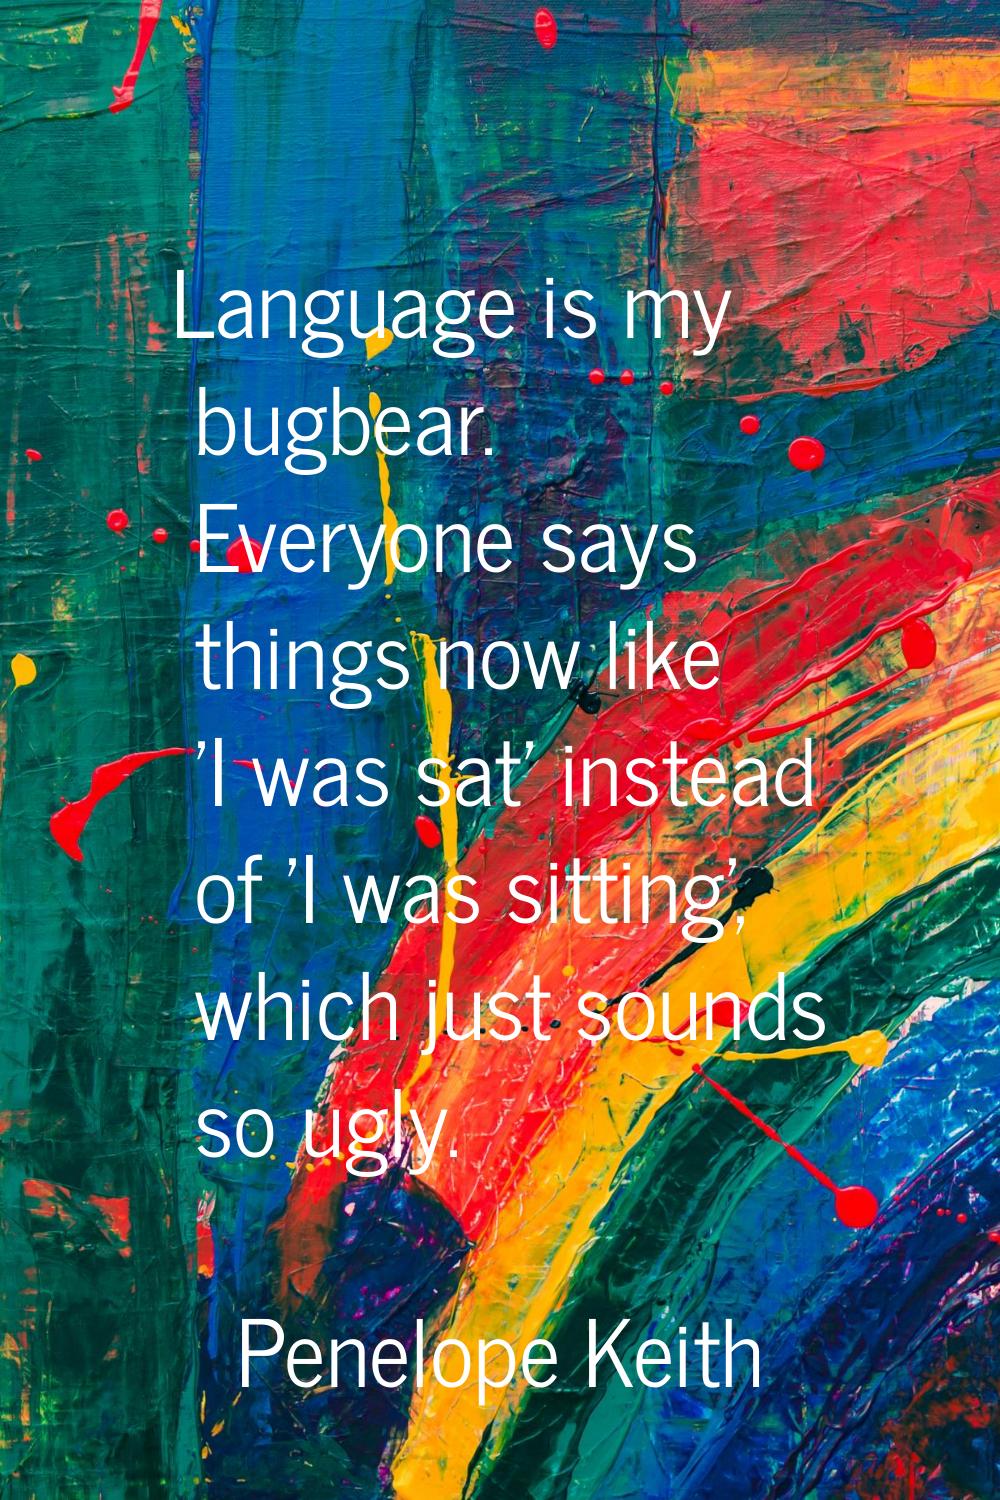 Language is my bugbear. Everyone says things now like 'I was sat' instead of 'I was sitting', which